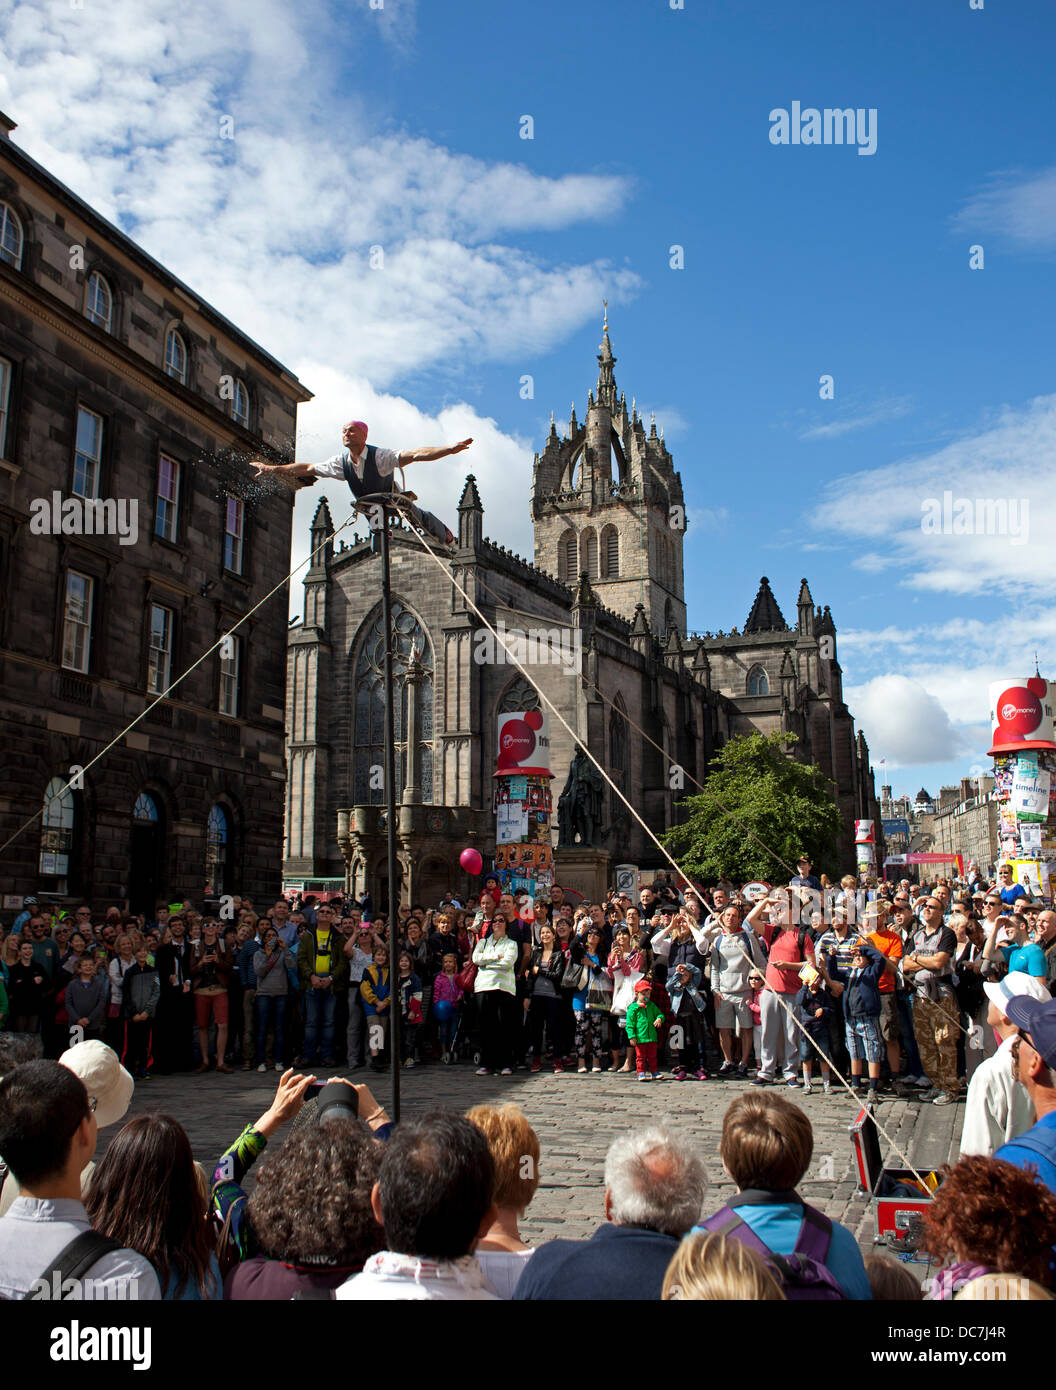 Edinburgh, UK. 11th Aug, 2013. Large audiences gather in the sunshine on Edinburgh's Royal Mile to be entertained by the highly skilful Street Performers during the Edinburgh Festival Fringe. Stock Photo